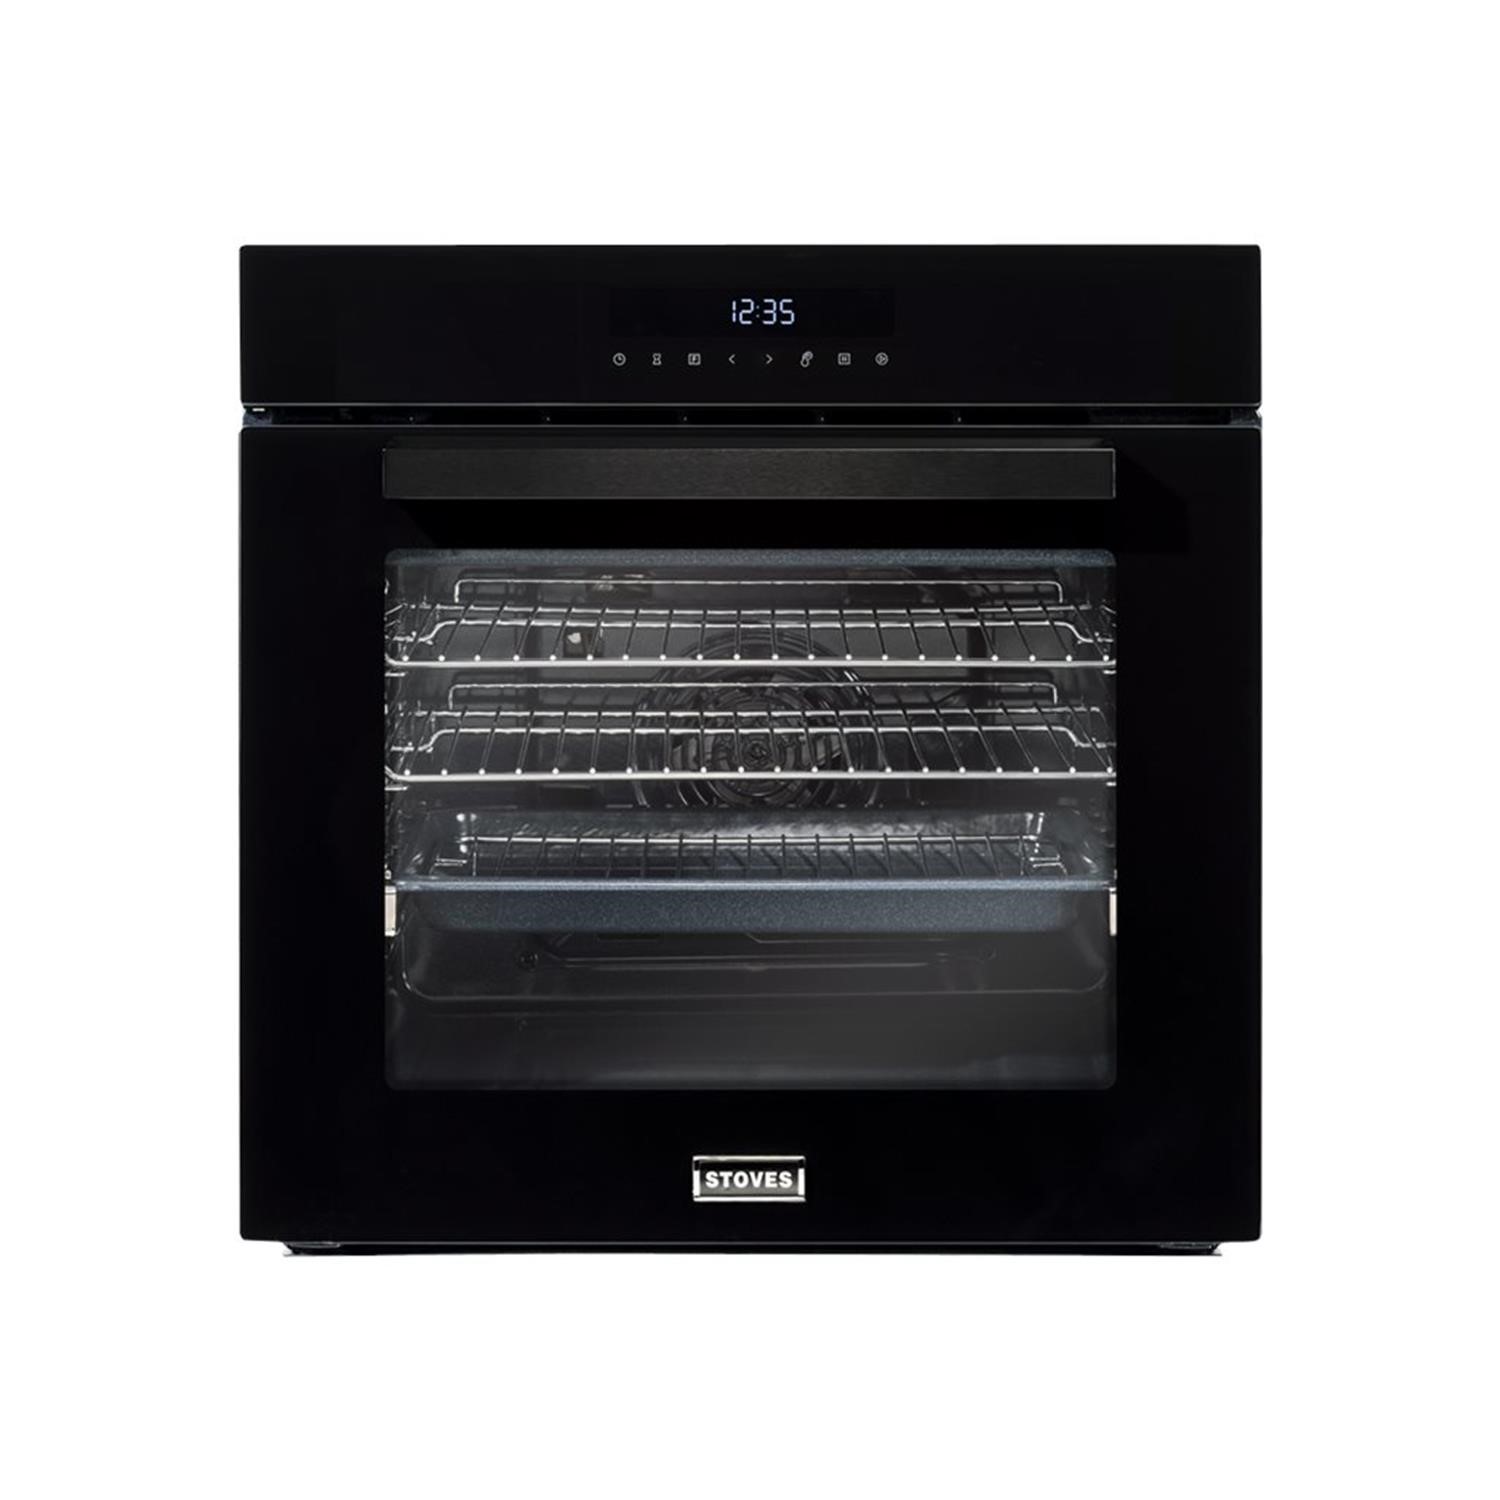 Refurbished Stoves ST SEB602MFC 60cm Single Built In Electric Oven